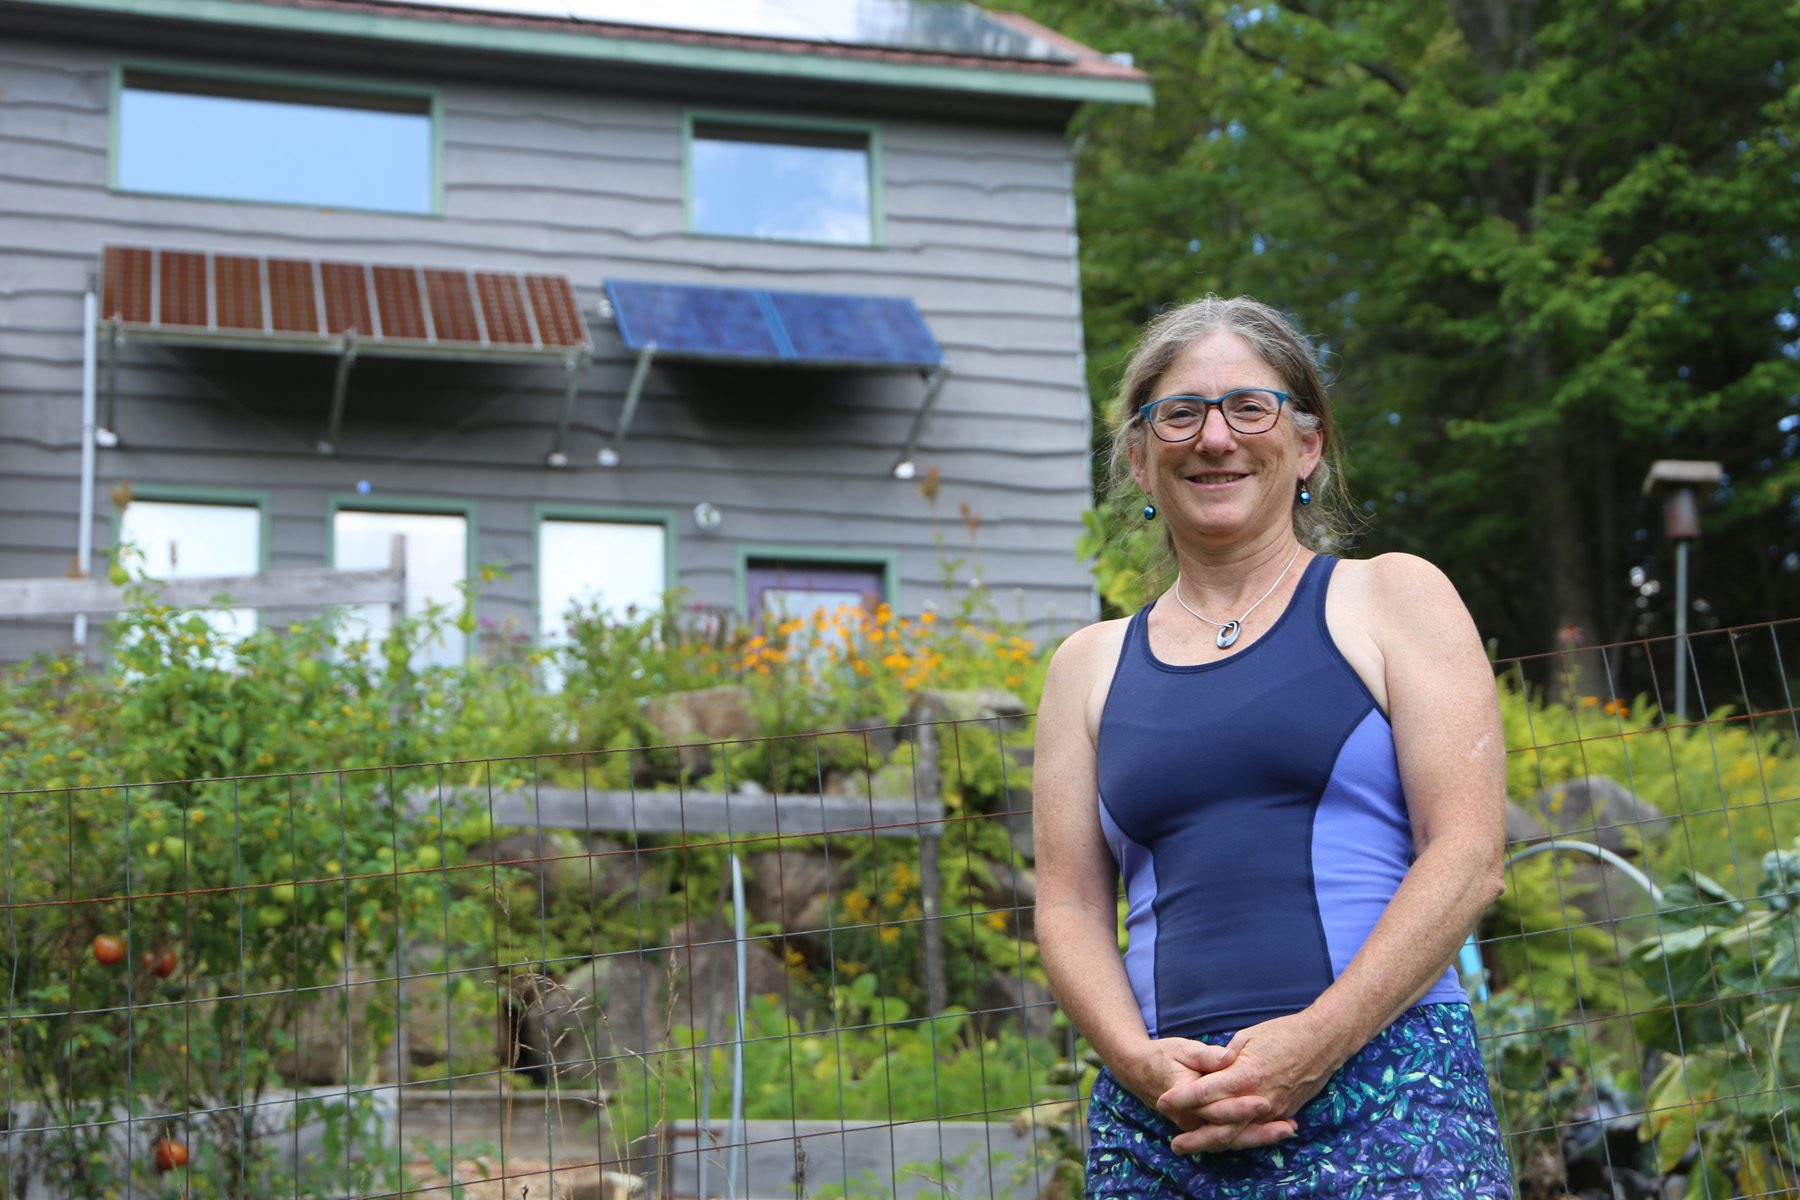 Nancy Bernstein stands in front of her home, which is powered mostly by solar panels.